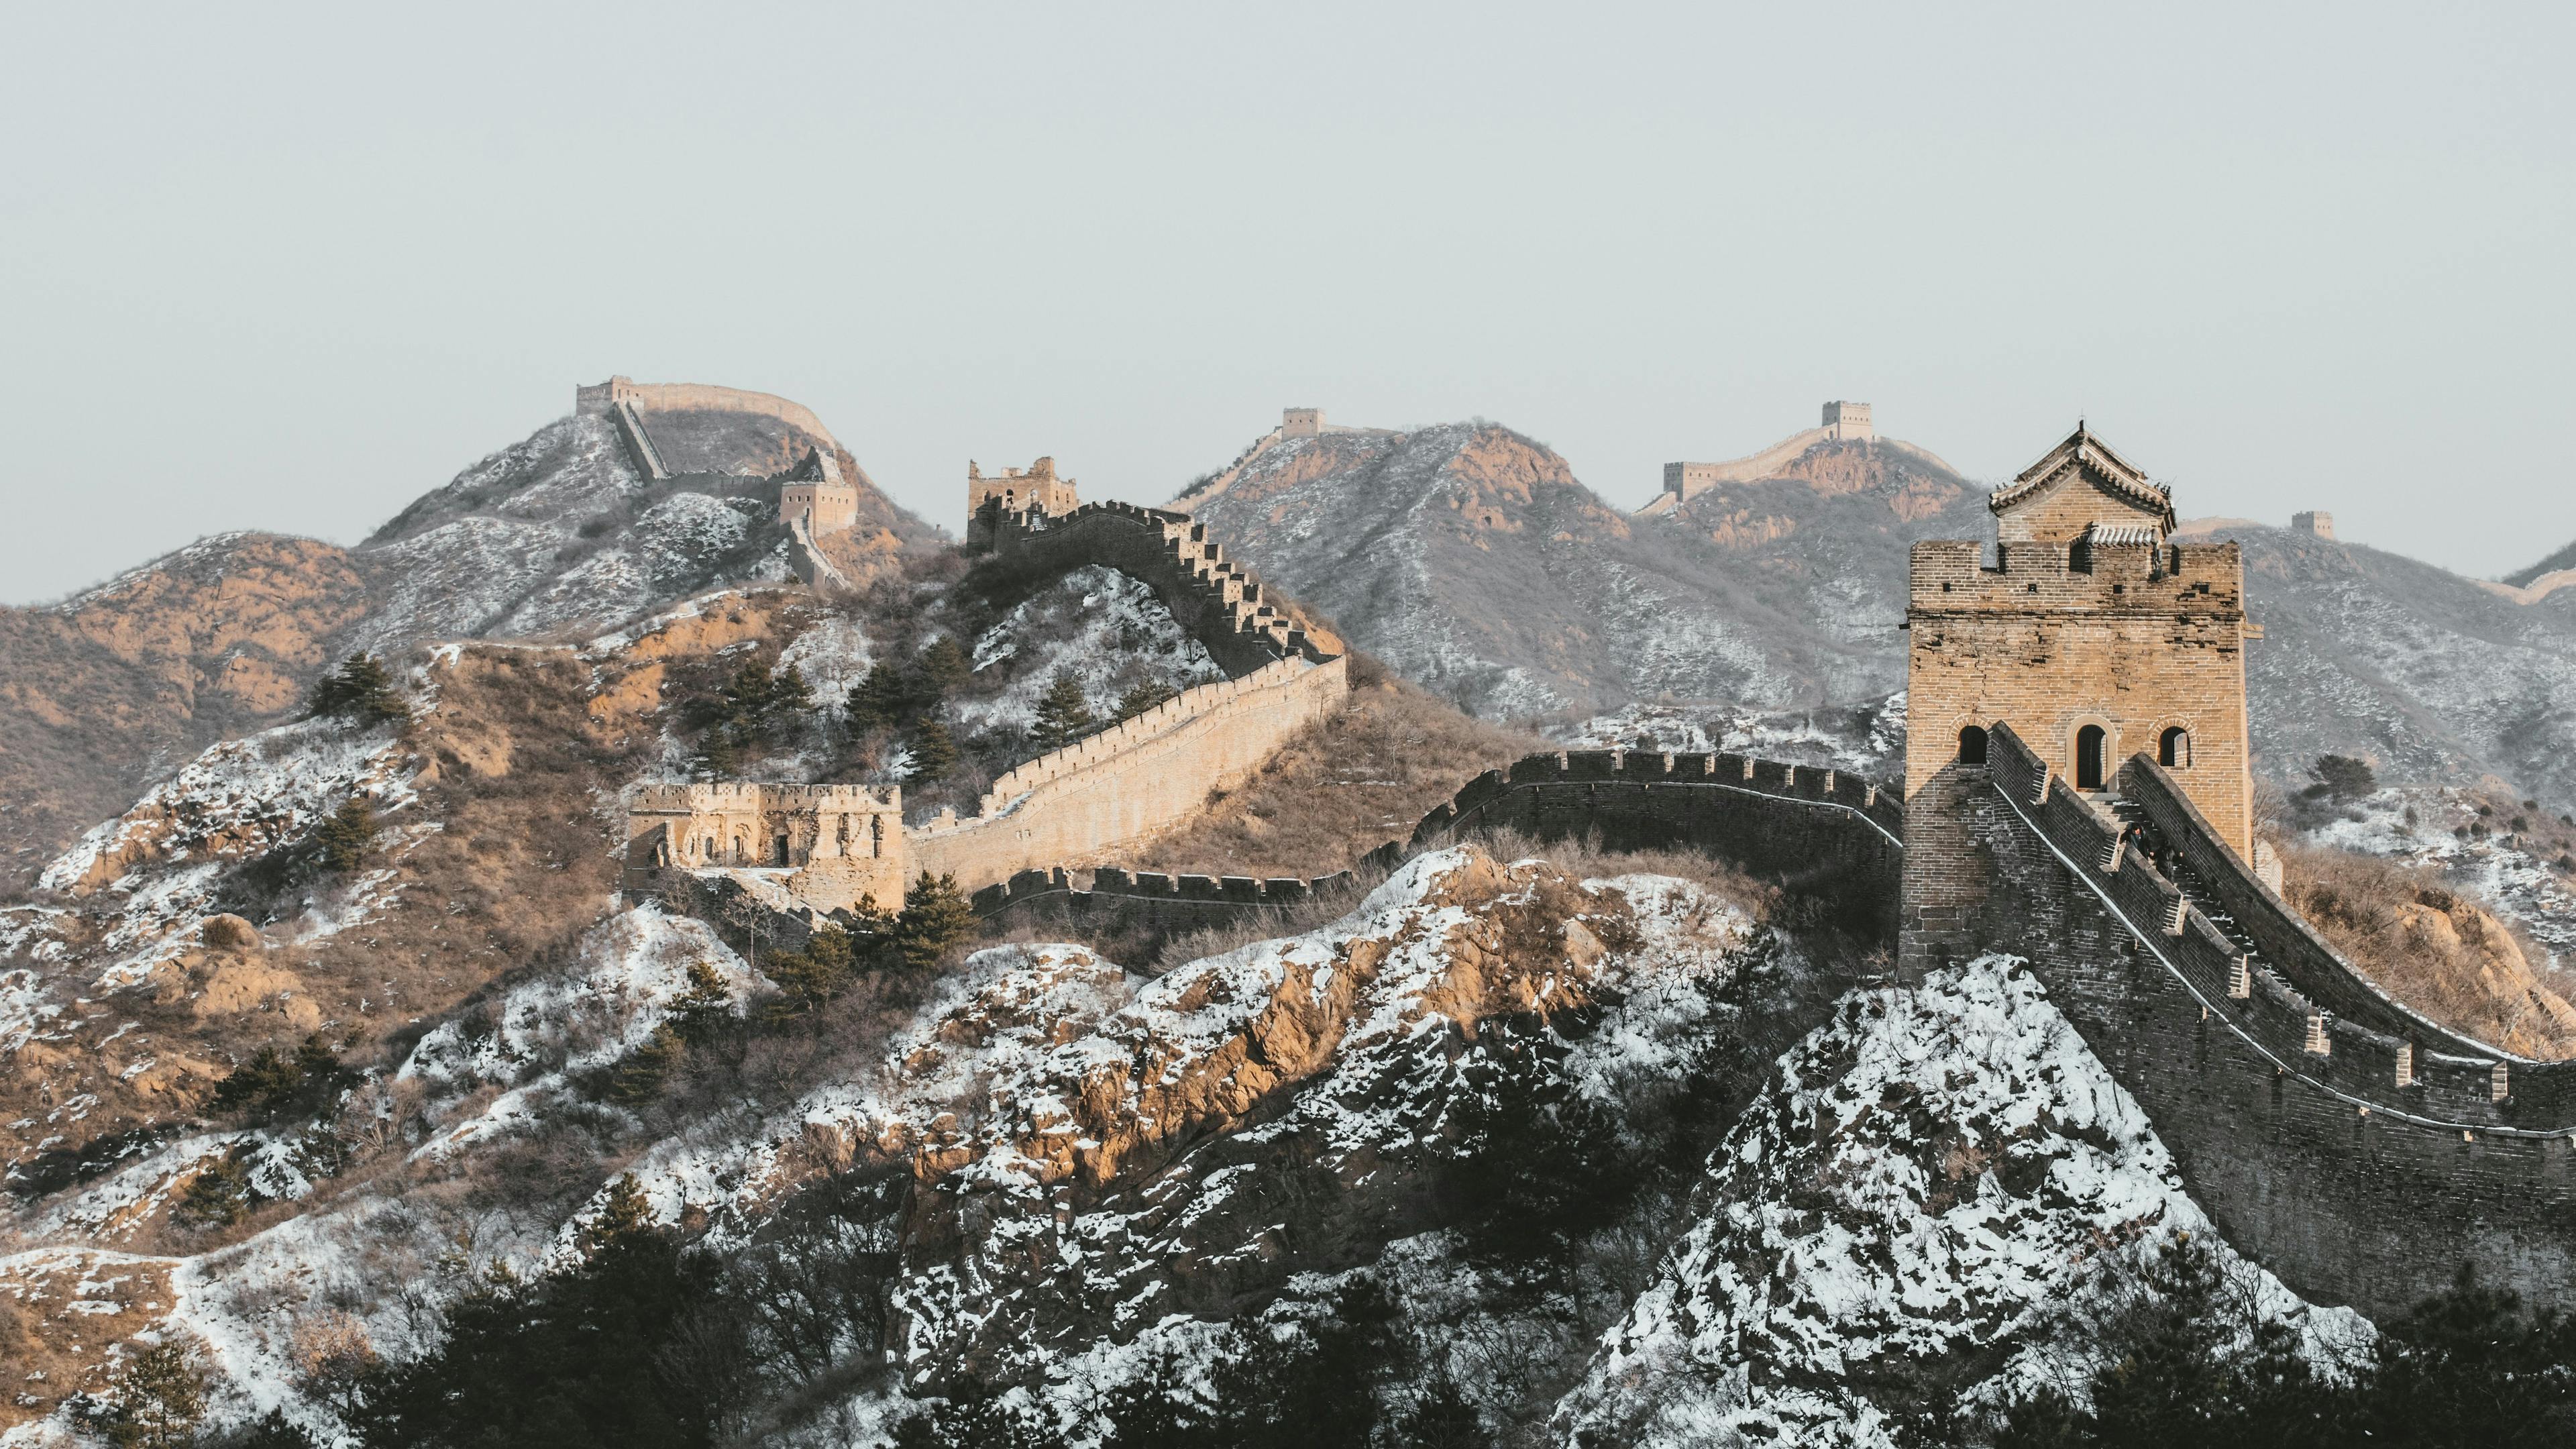 Winter in China and snow on the Great Wall